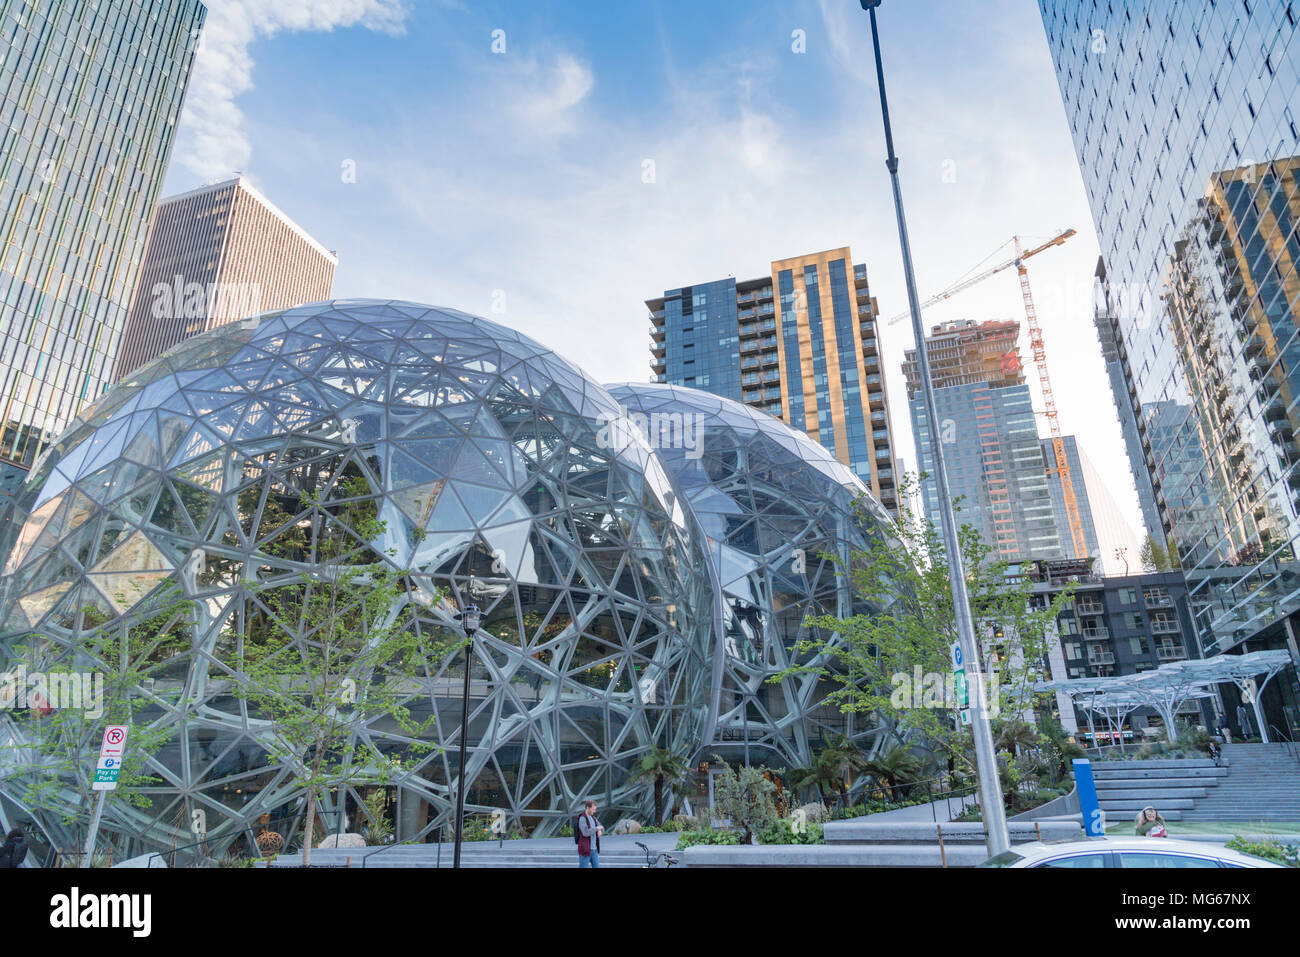 The Amazon Company world headquarters Spheres terrarium green houses  located in downtown Seattle on a spring afternoon Circa April 2018 condos  Stock Photo - Alamy